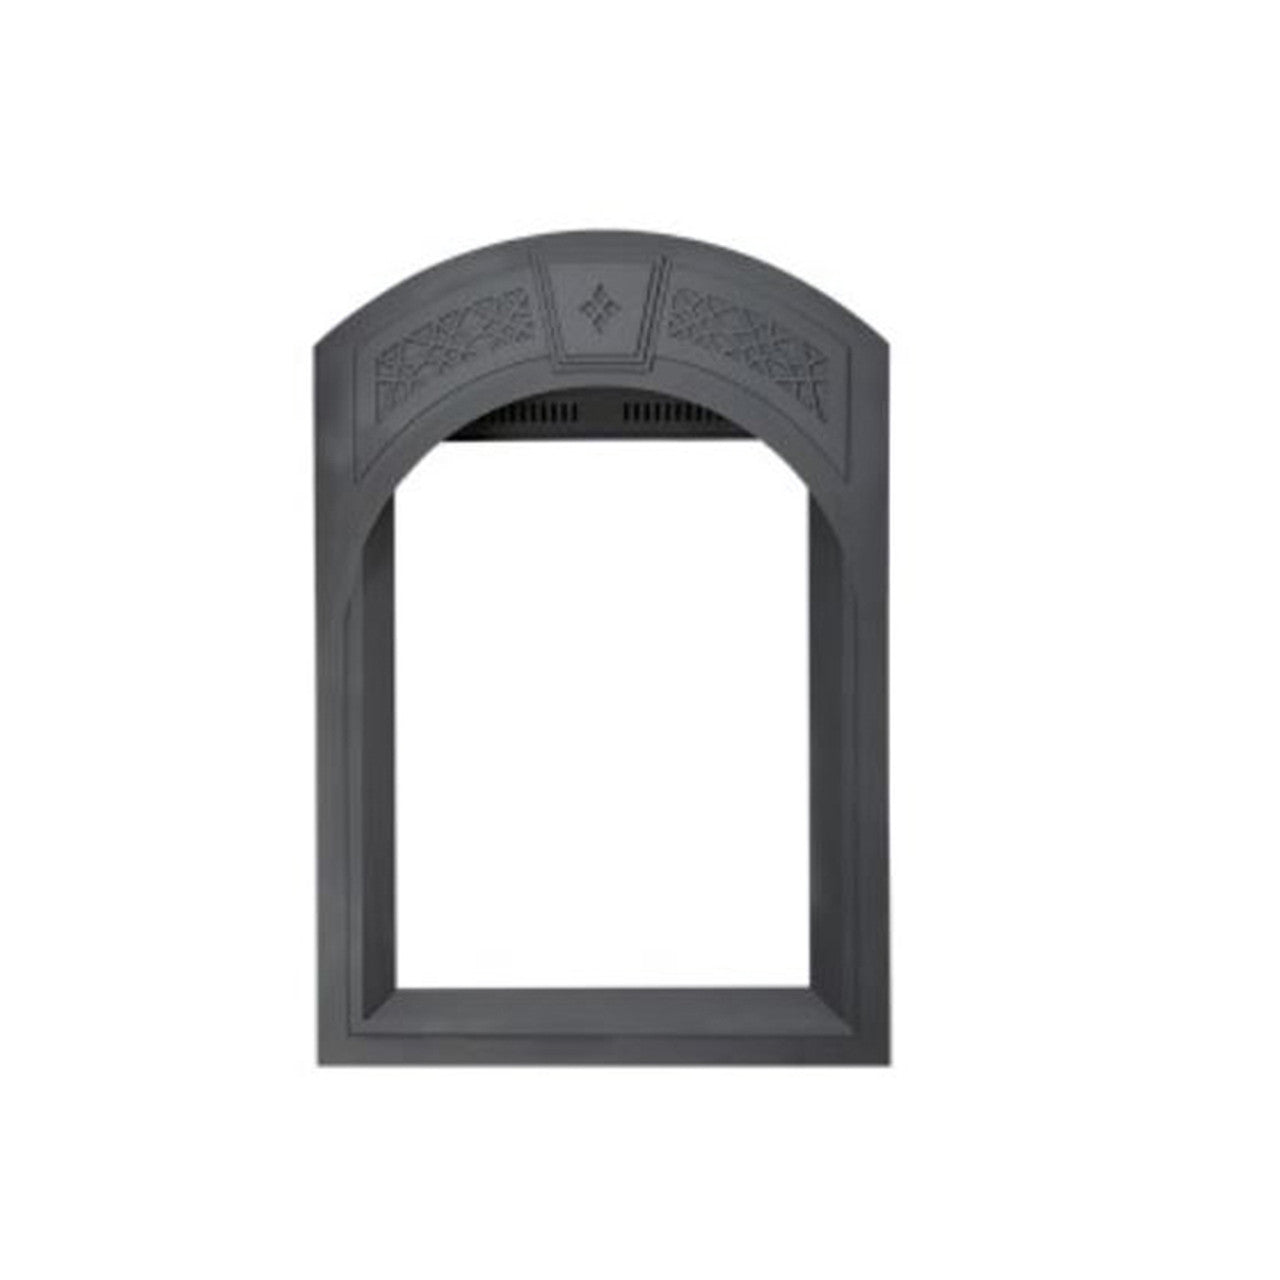 Arched Black Heritage Pattern Surround with Safety Barrier for Park Avenue - AFK82-1SB - Chimney Cricket